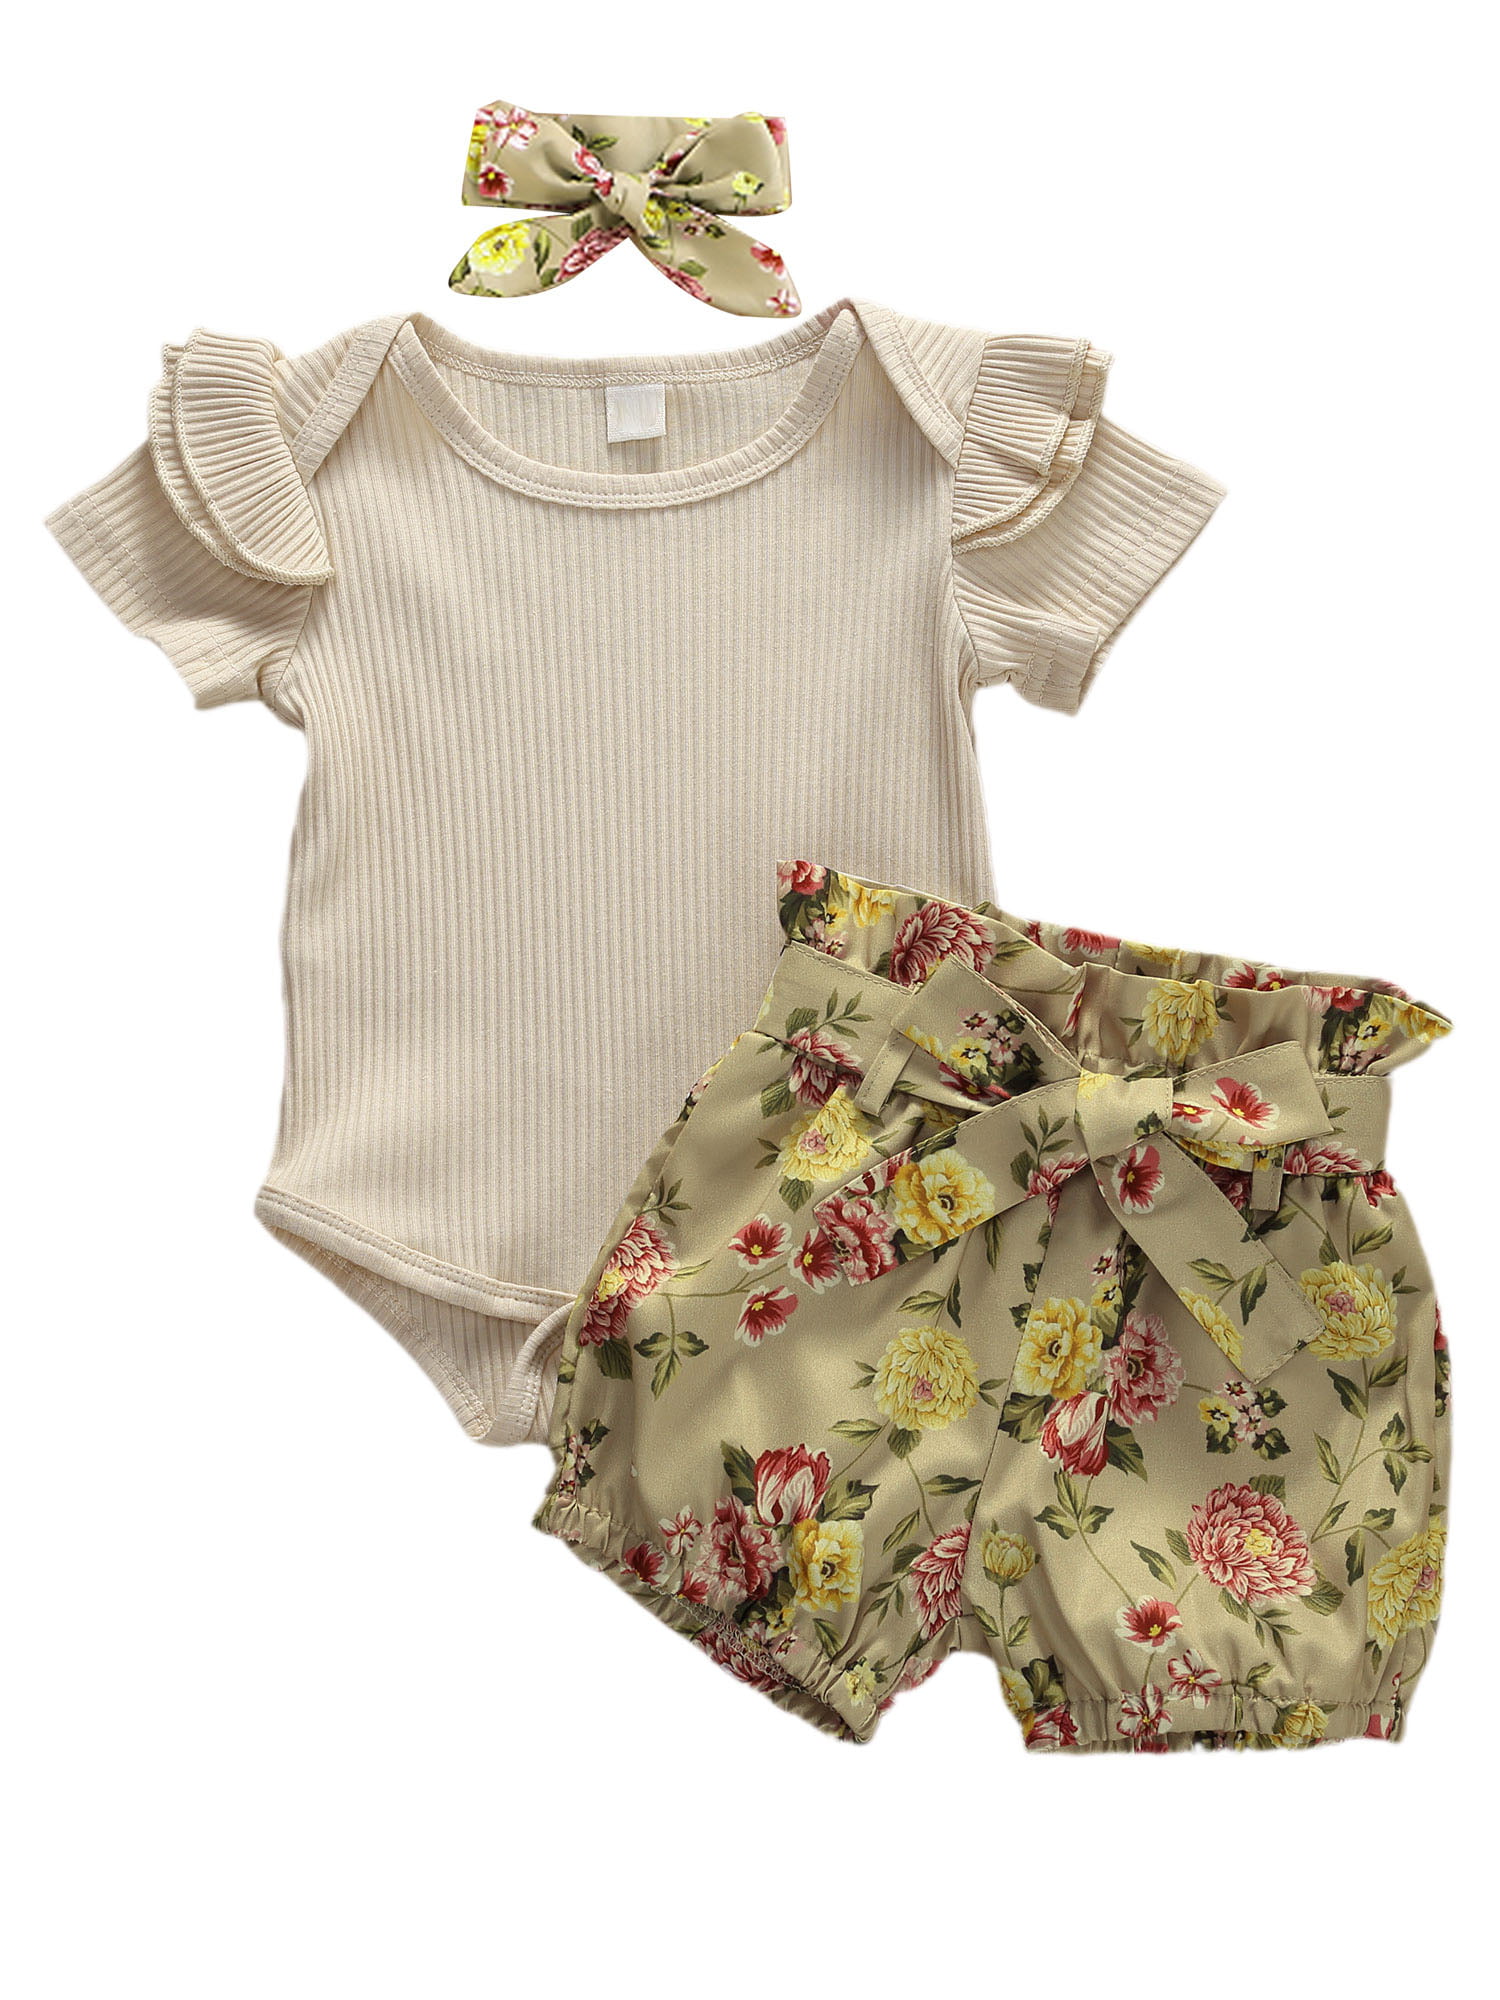 3Pcs Newborn Kid Baby Girl Romper Floral Pants Headband Outfit Summer Clothes